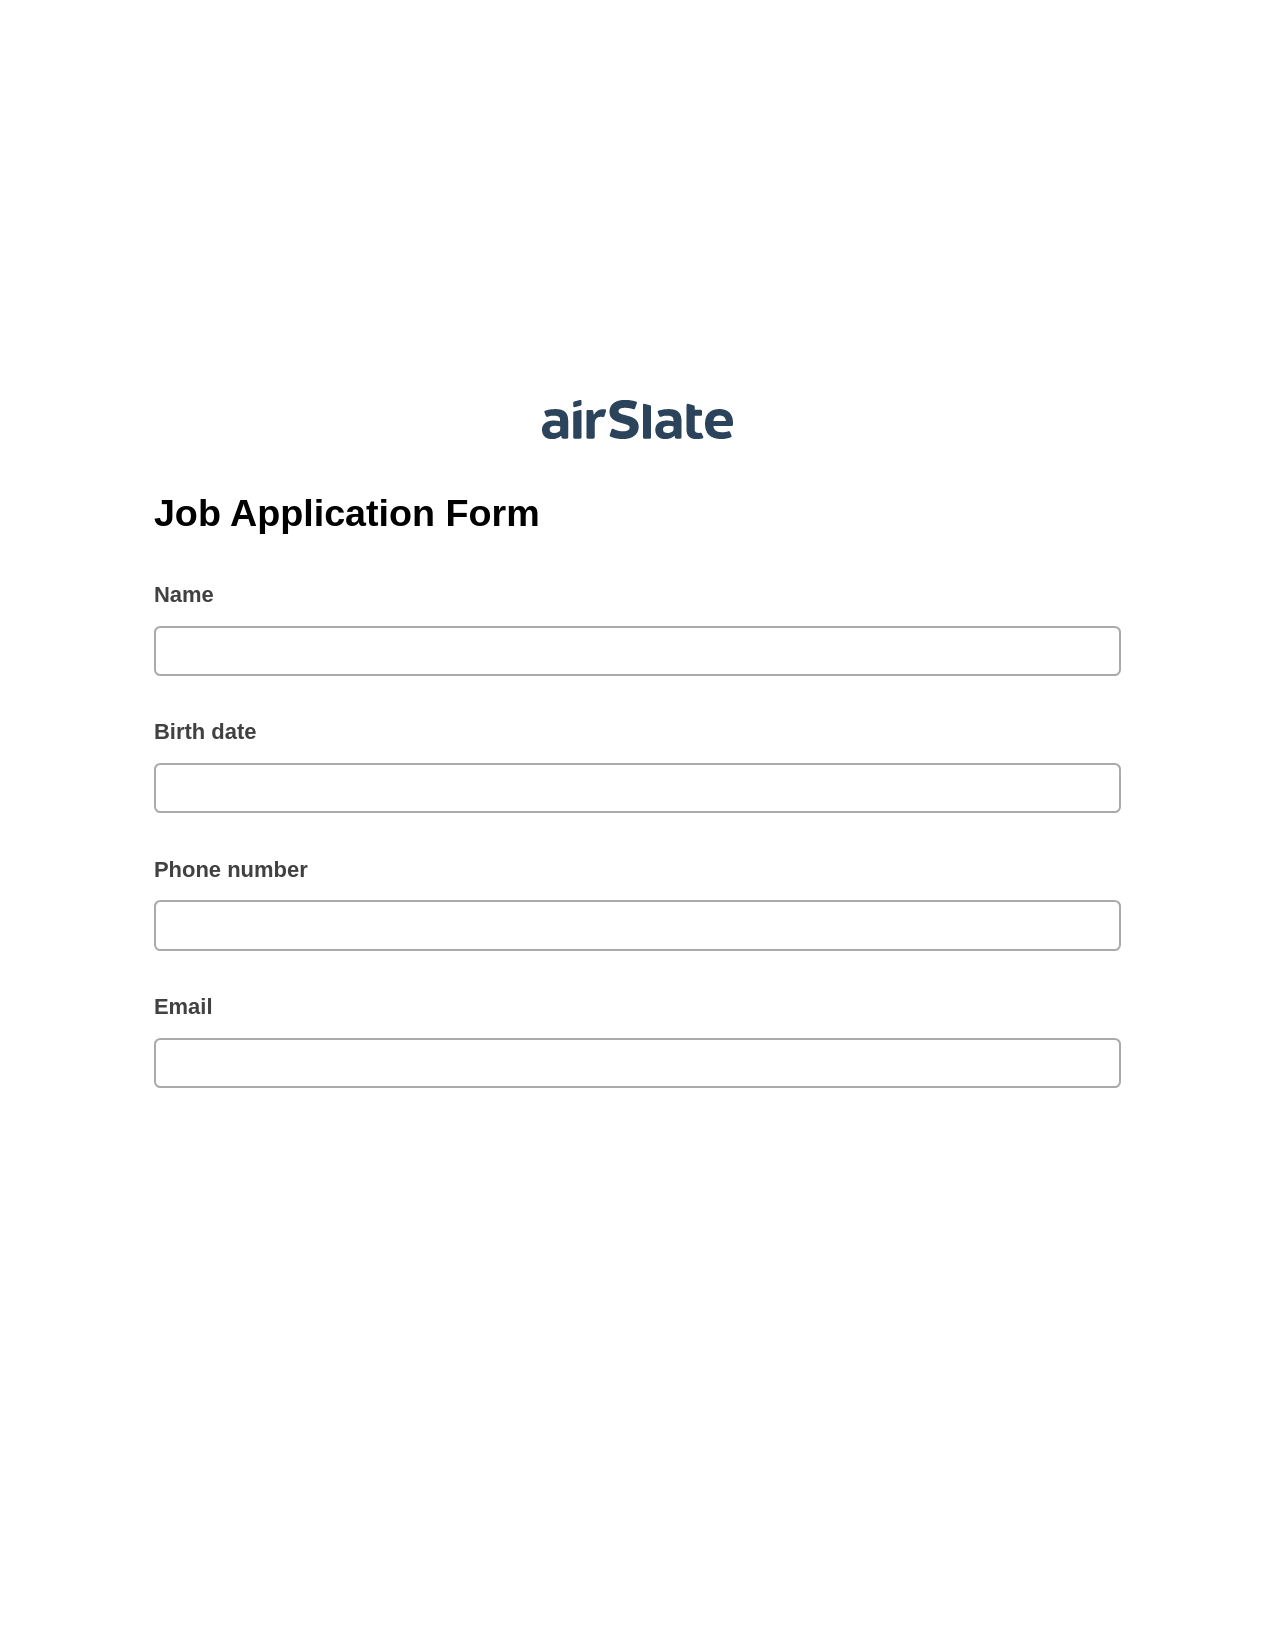 Job Application Form Pre-fill from Office 365 Excel Bot, Audit Trail Bot, Post-finish Document Bot